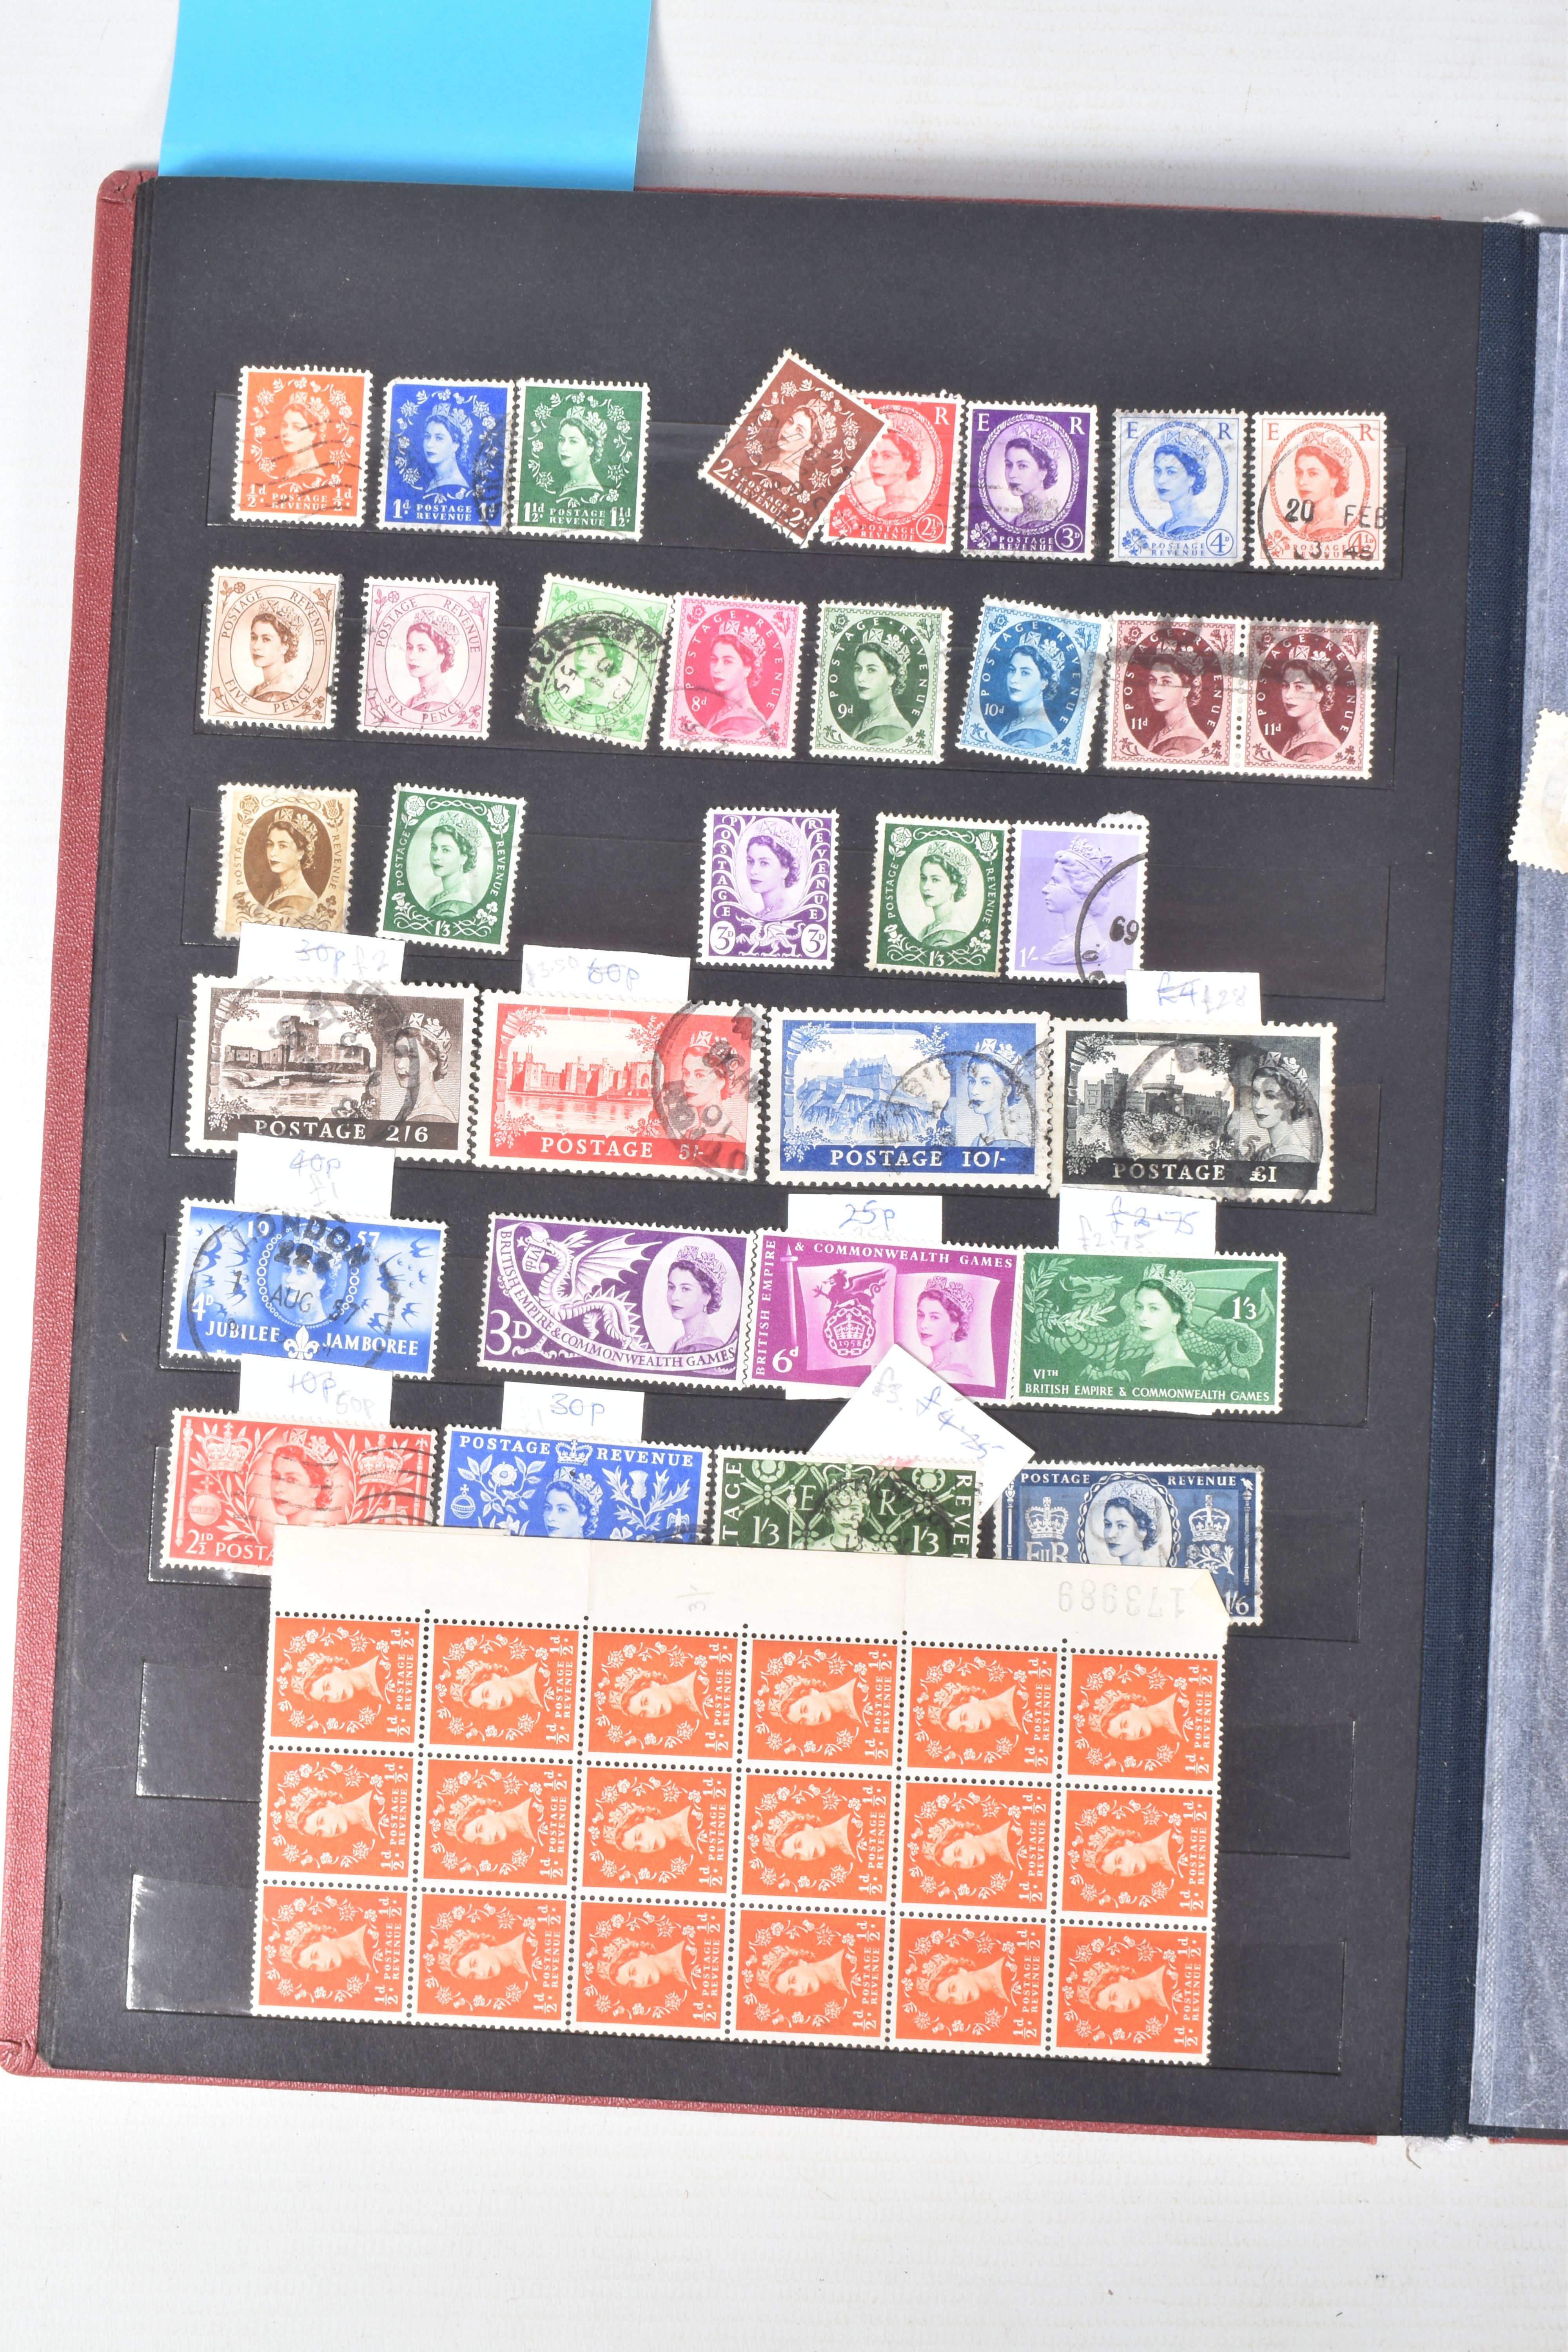 LARGE ACCUMULATION OF STAMPS IN 2 BOXES. Includes 1970s presentation cards, but main value is in - Image 20 of 30